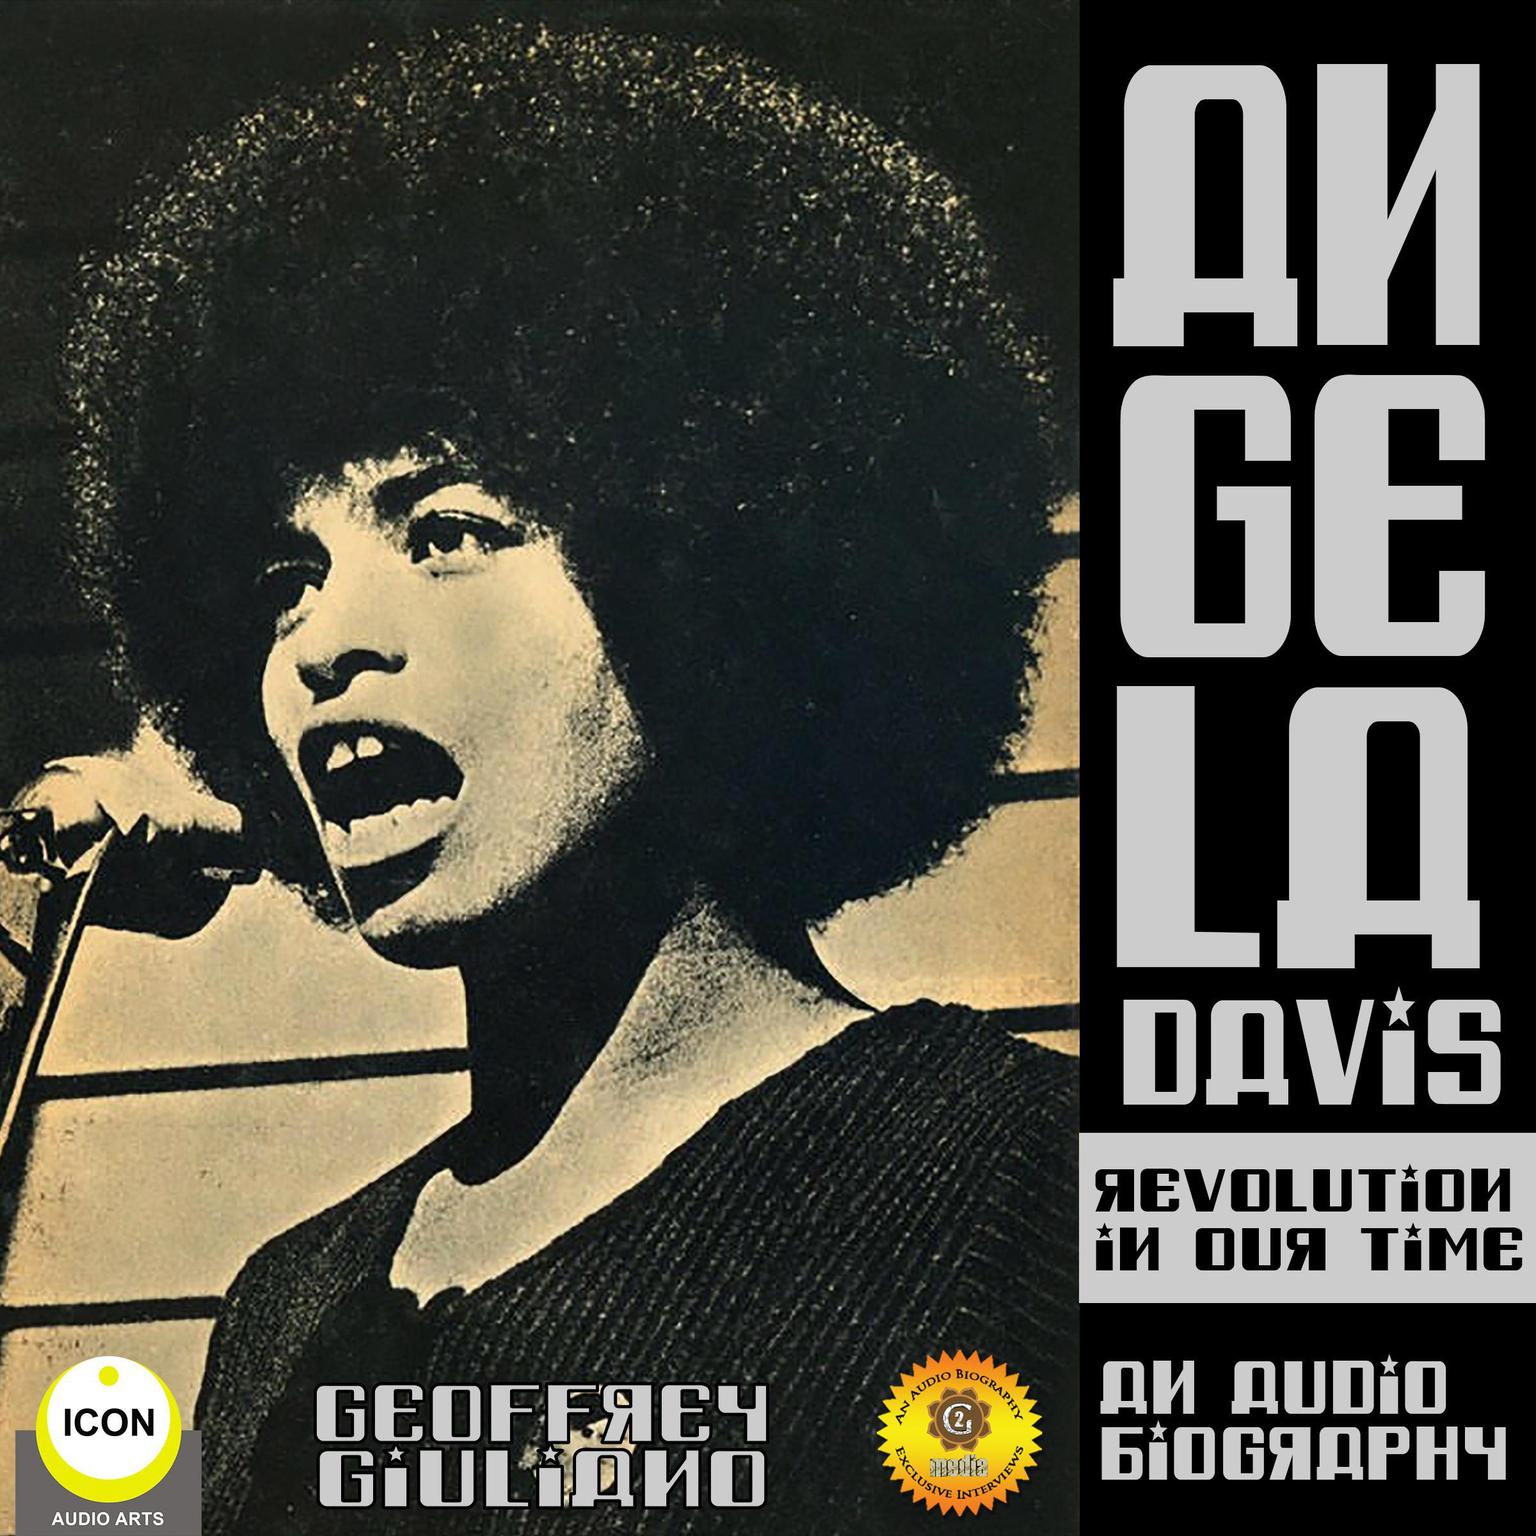 Angela Davis Revolution in Our Time - an Audio Biography Audiobook, by Geoffrey Giuliano